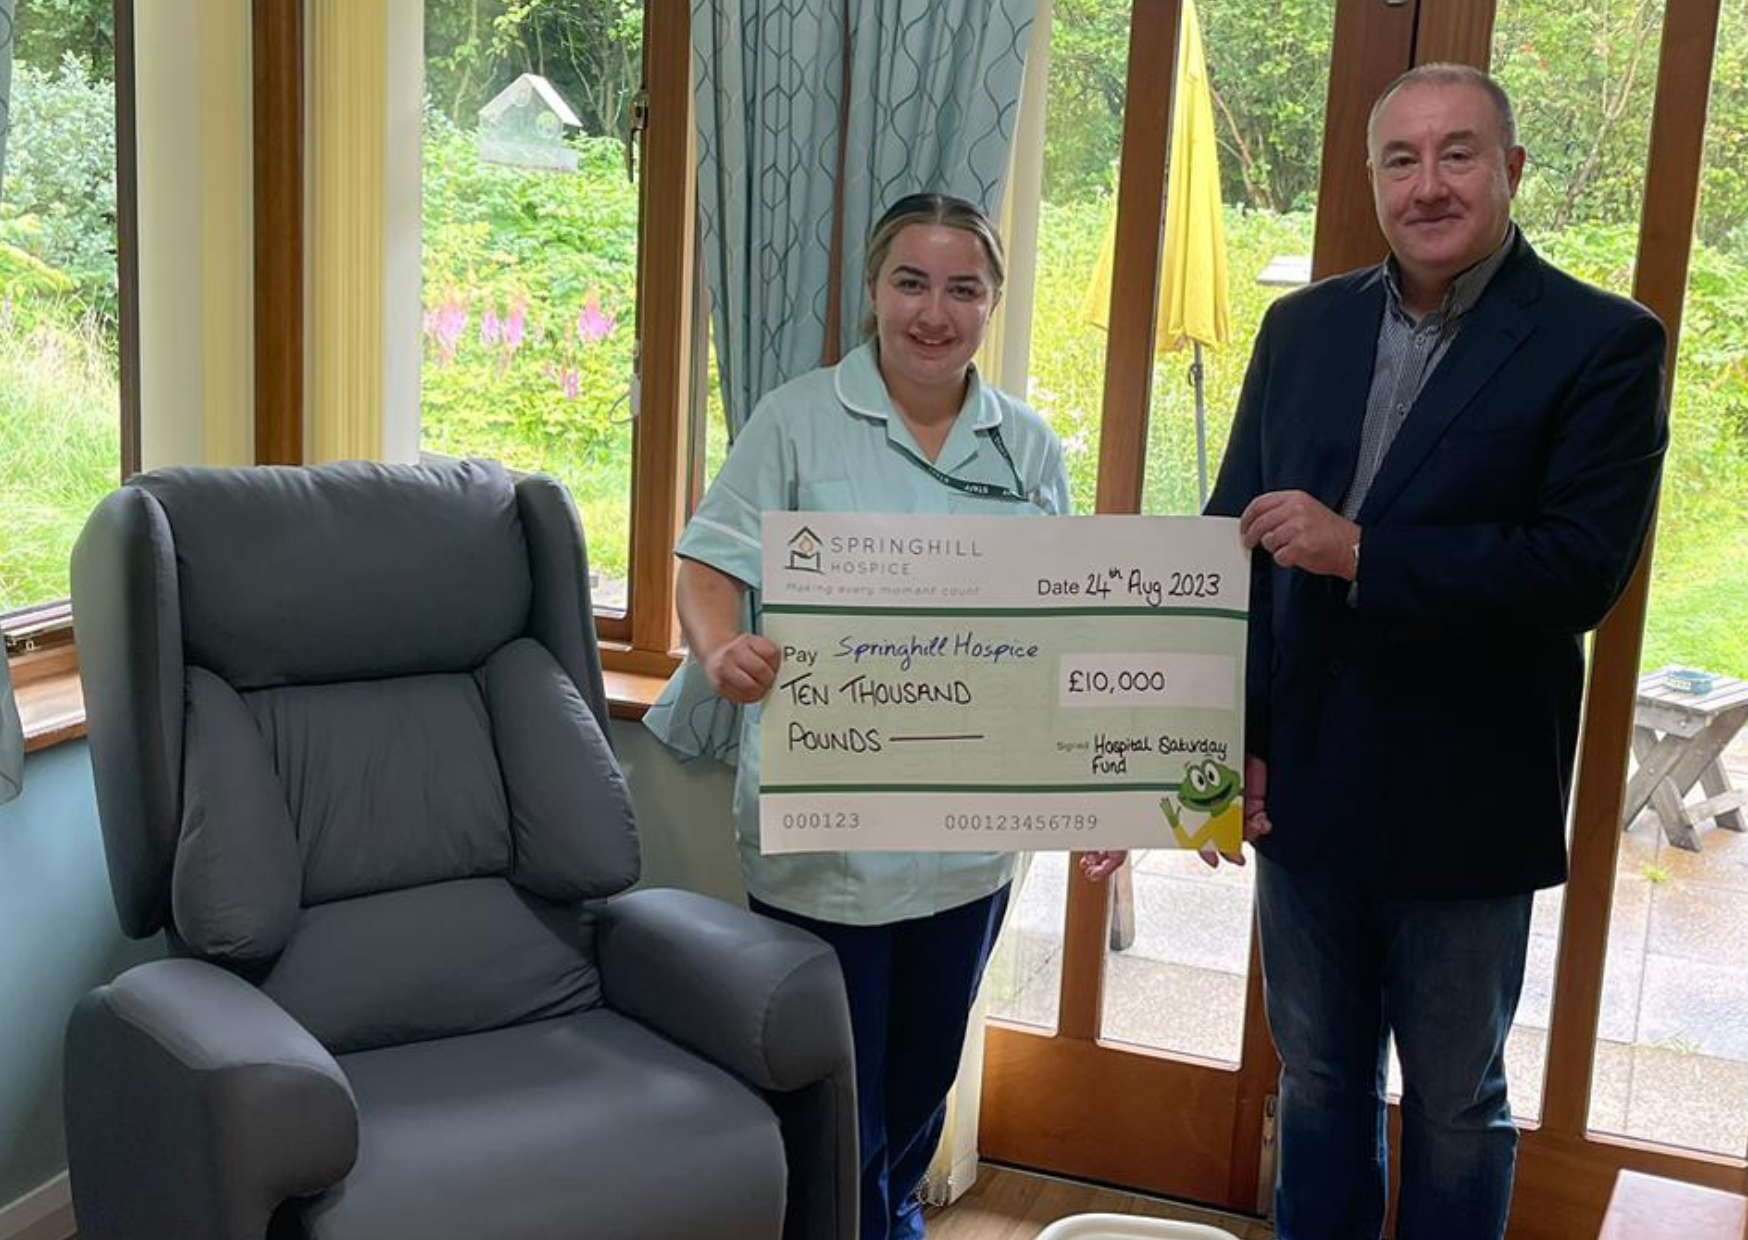 HSF grant of £10,000 received